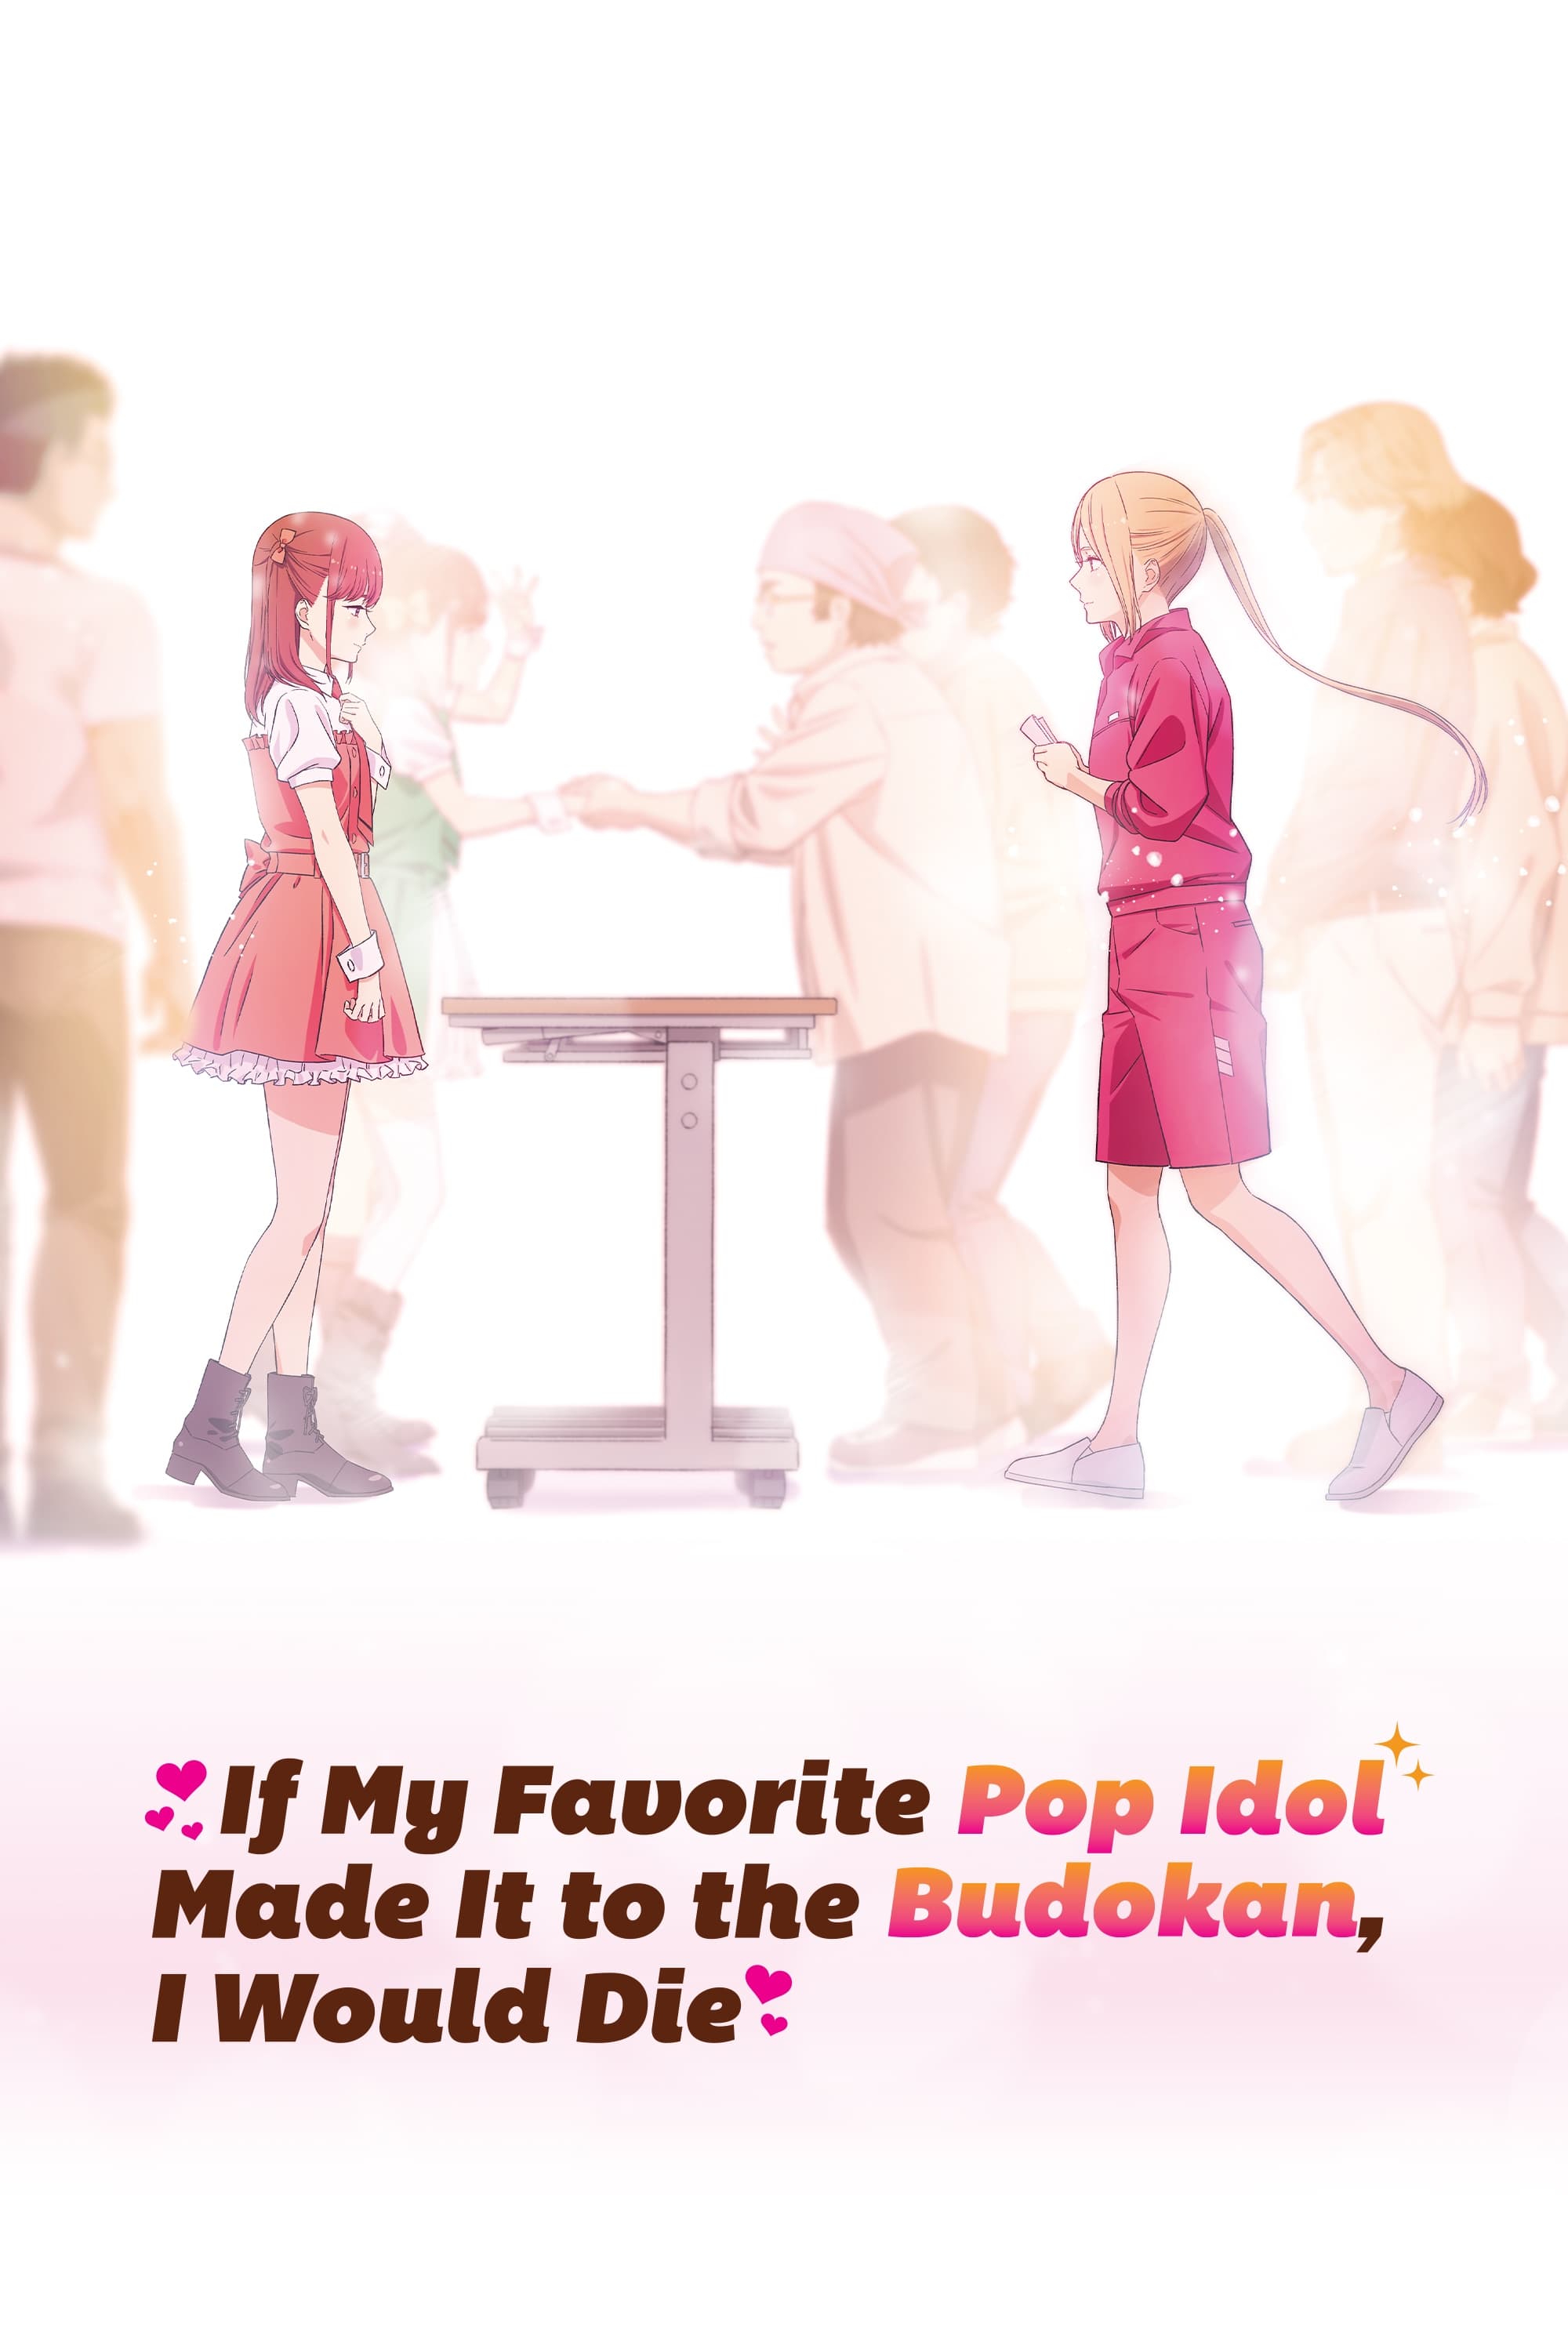 If My Favorite Pop Idol Made It to the Budokan, I Would Die